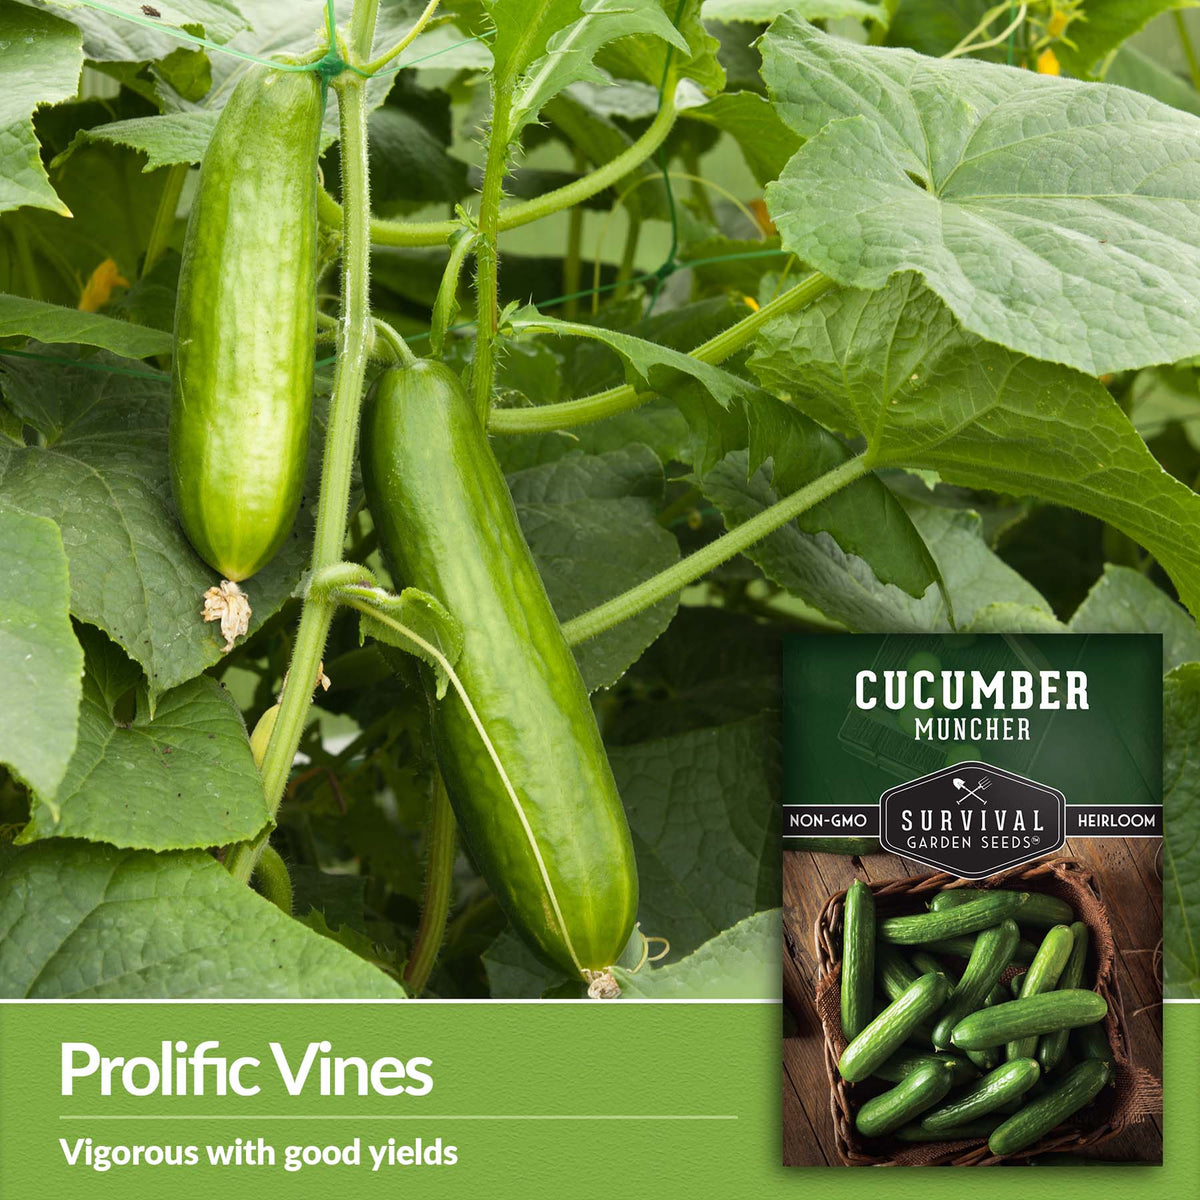 Muncher Cucumber seeds produce prolific vines with good yields